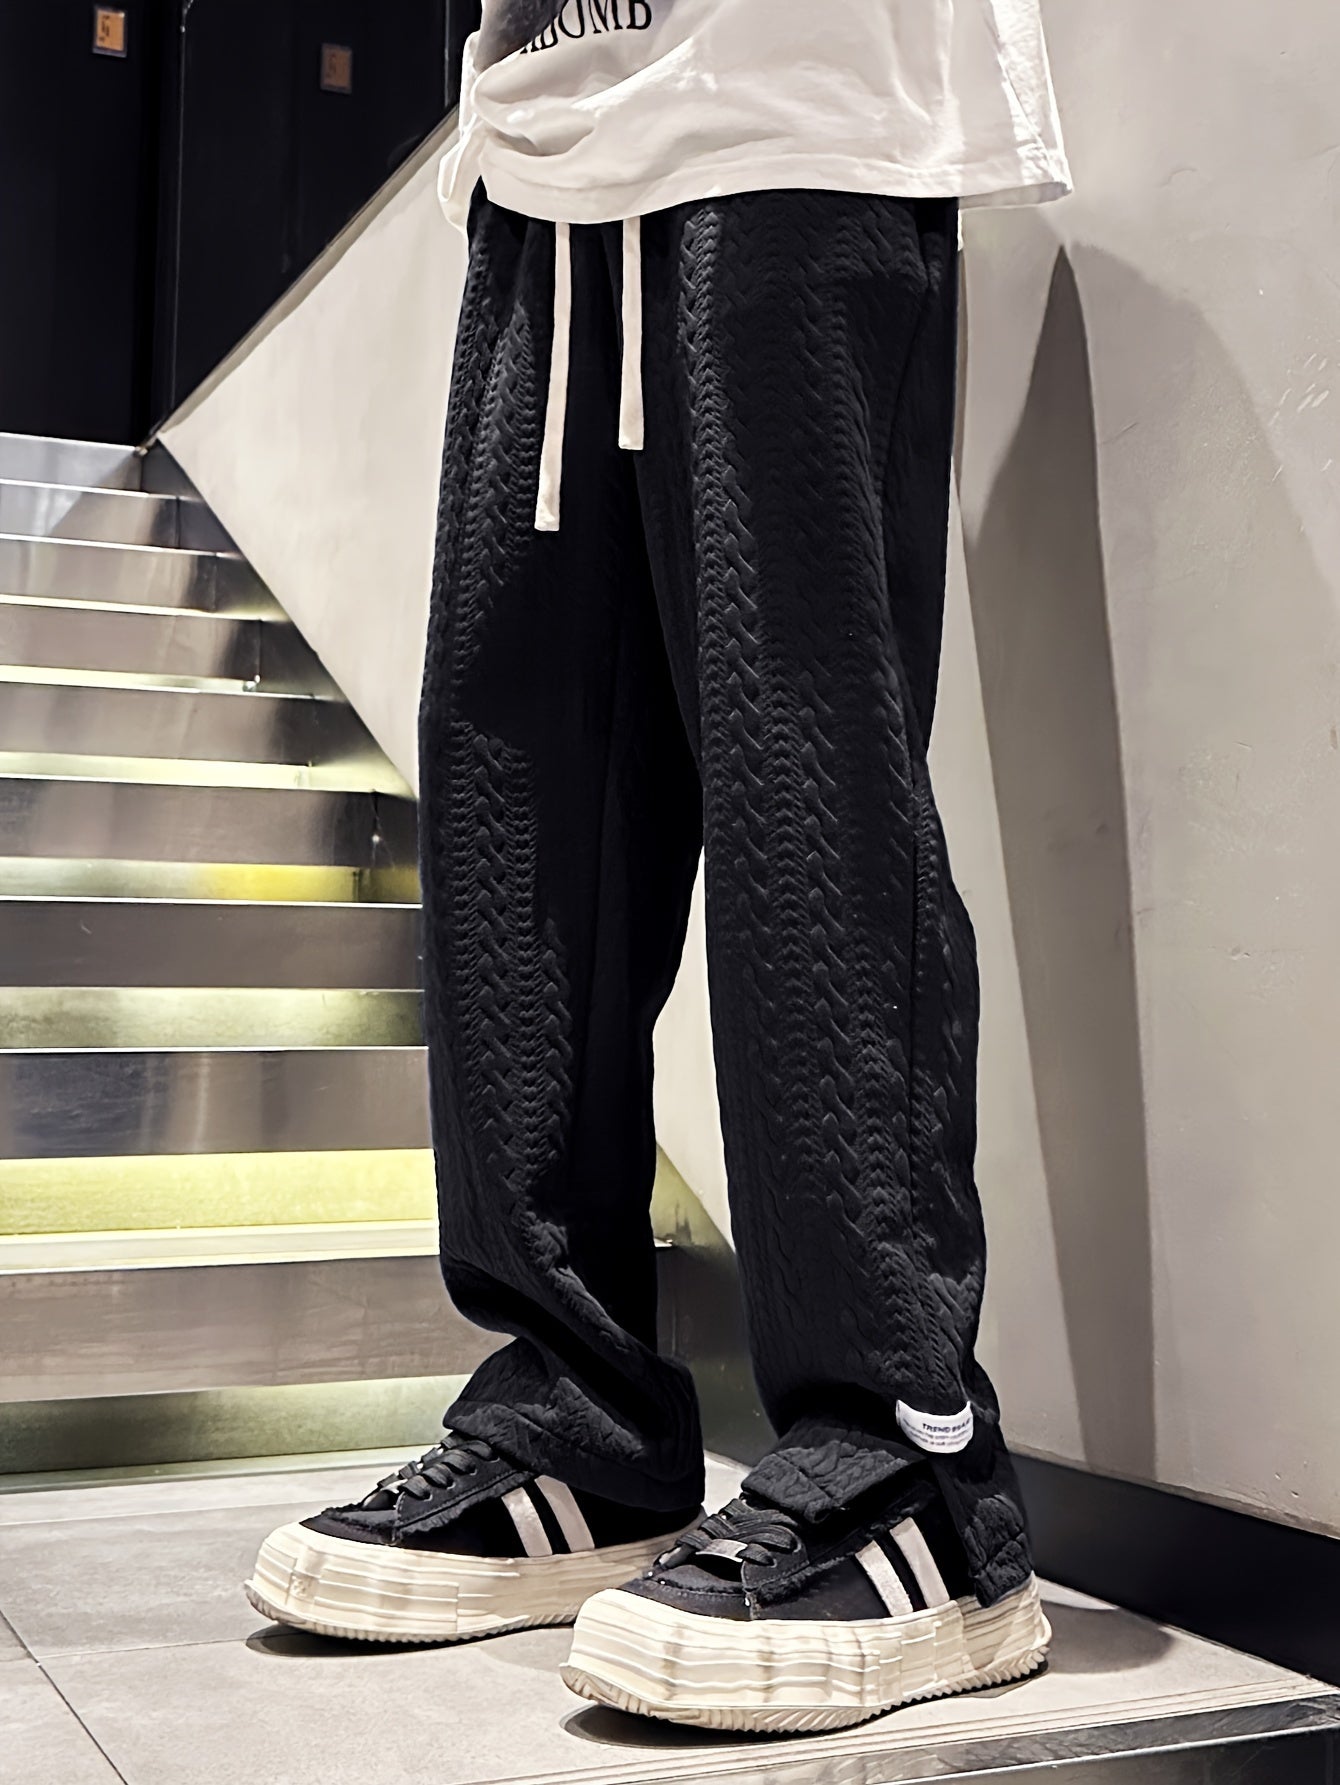 Drawstring Sweatpants Loose Fit Pants Men's Casual Baggy Pants Straight Leg Trousers For Spring Autumn Streetwear